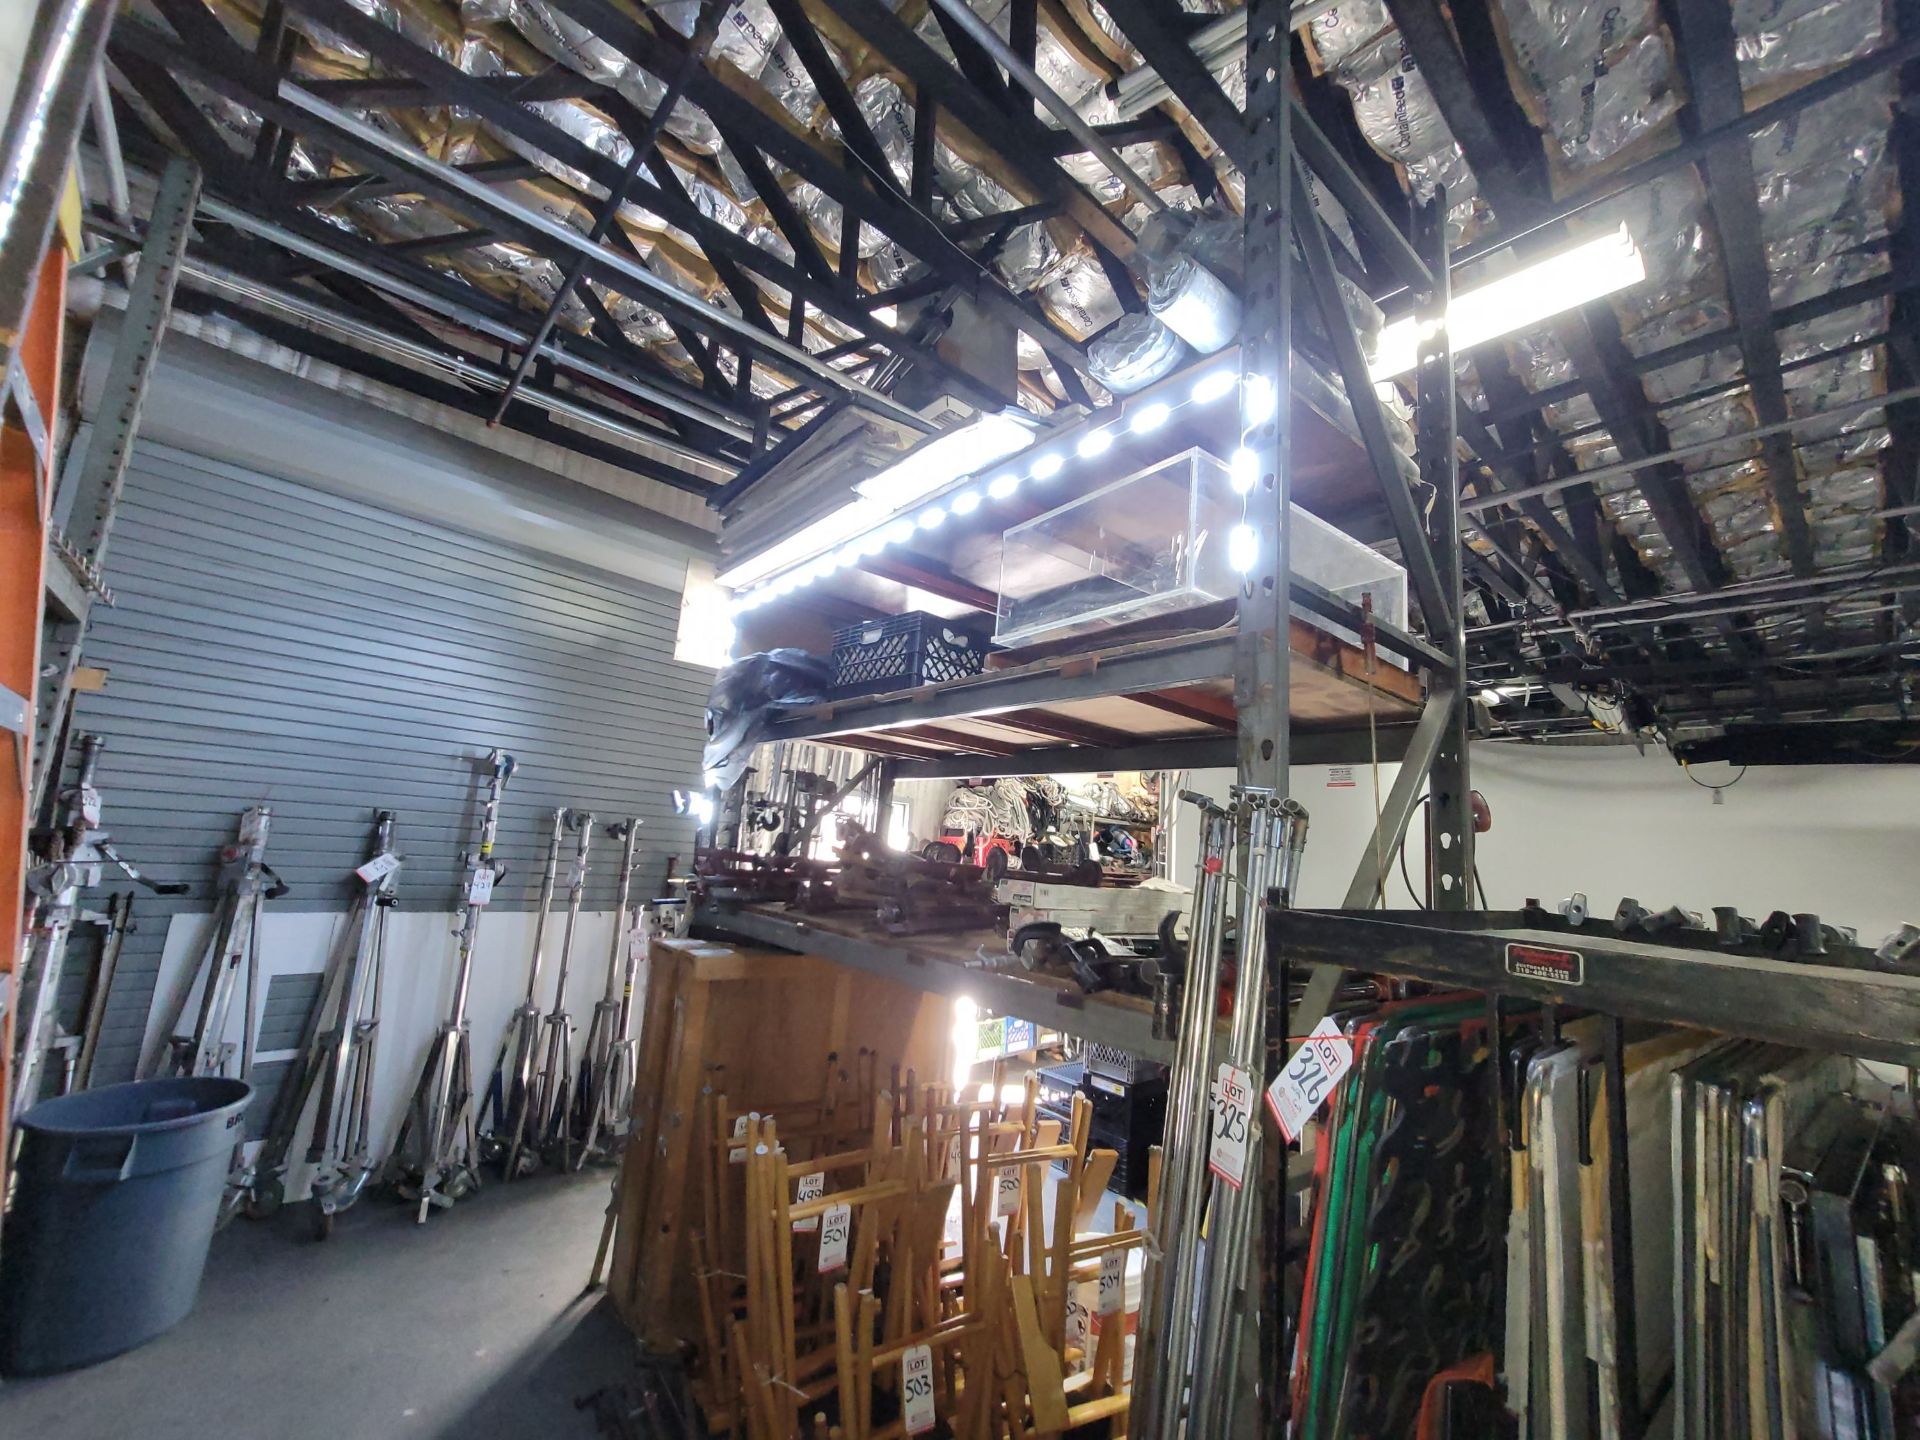 LOT - PALLET RACK: (1) SECTION, 8' BEAMS, 12' UPRIGHTS, PLYWOOD DECKING, CONTENTS NOT INCLUDED (